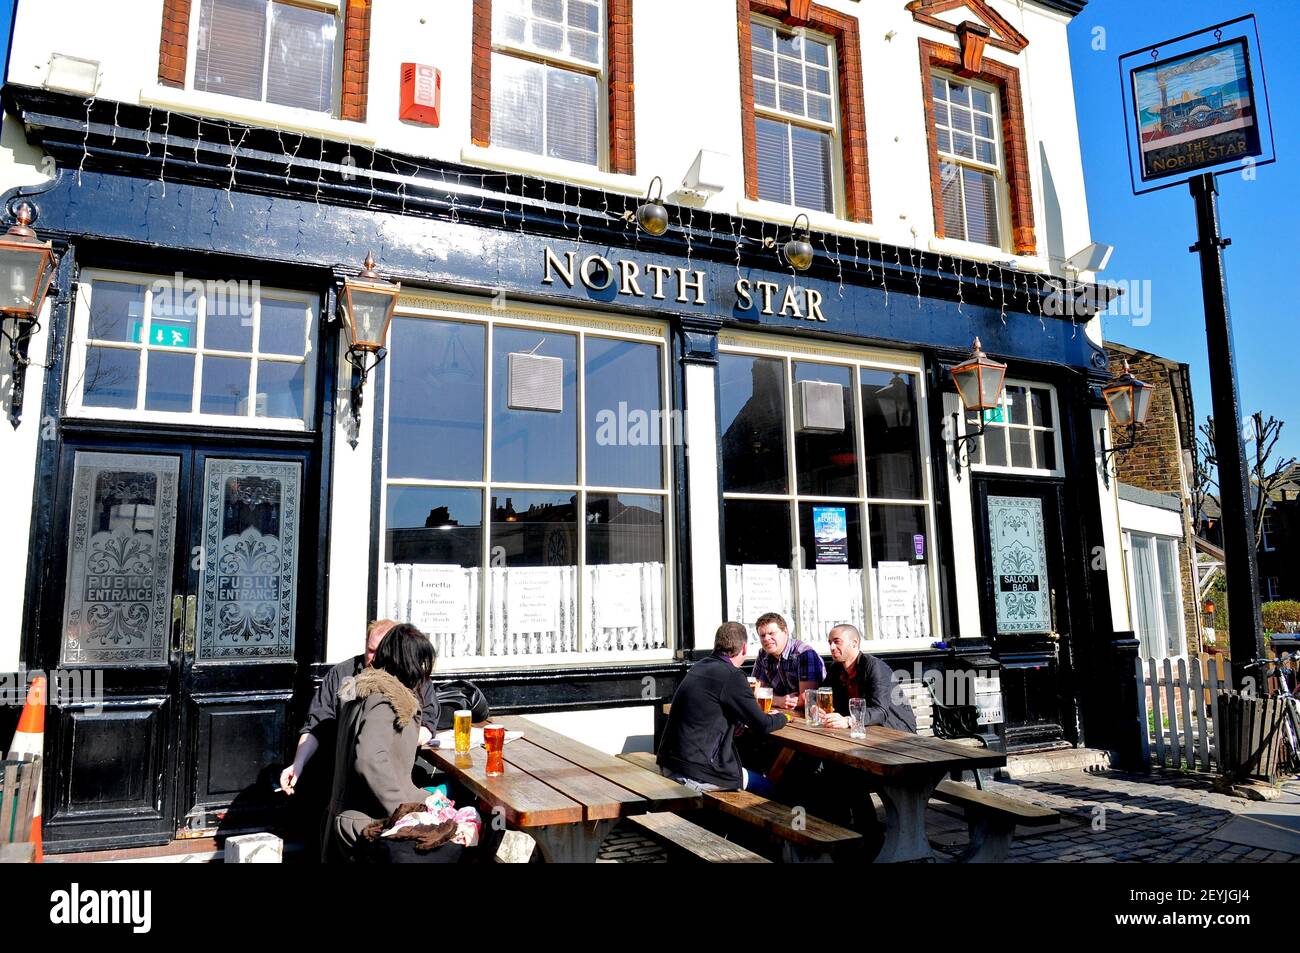 People chatting outside The North Star pub in Leytonstone, London, England Stock Photo